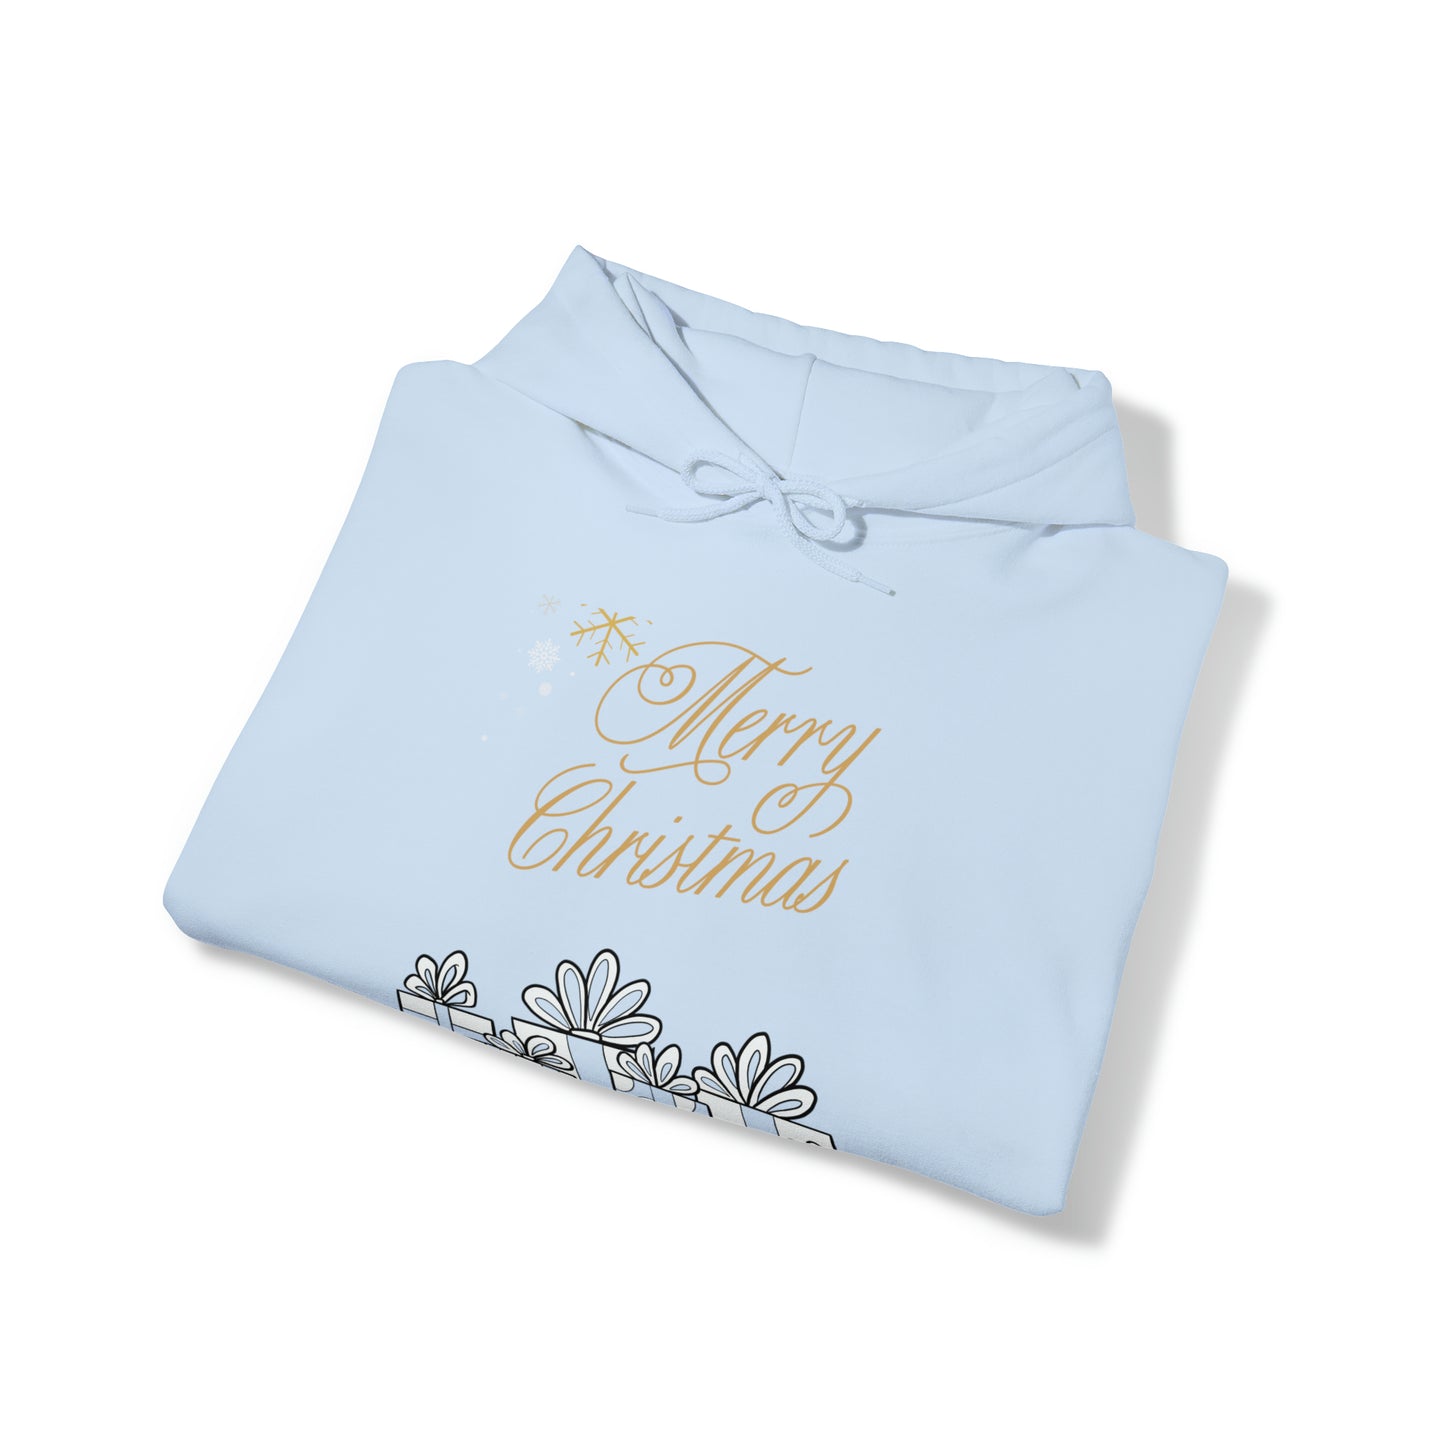 Winter Elegance Unisex Heavy Blend Sweatshirt with Christmas Touch, Quality and Joy Christmas Sweatshirt, Christmas gift, perfect gift